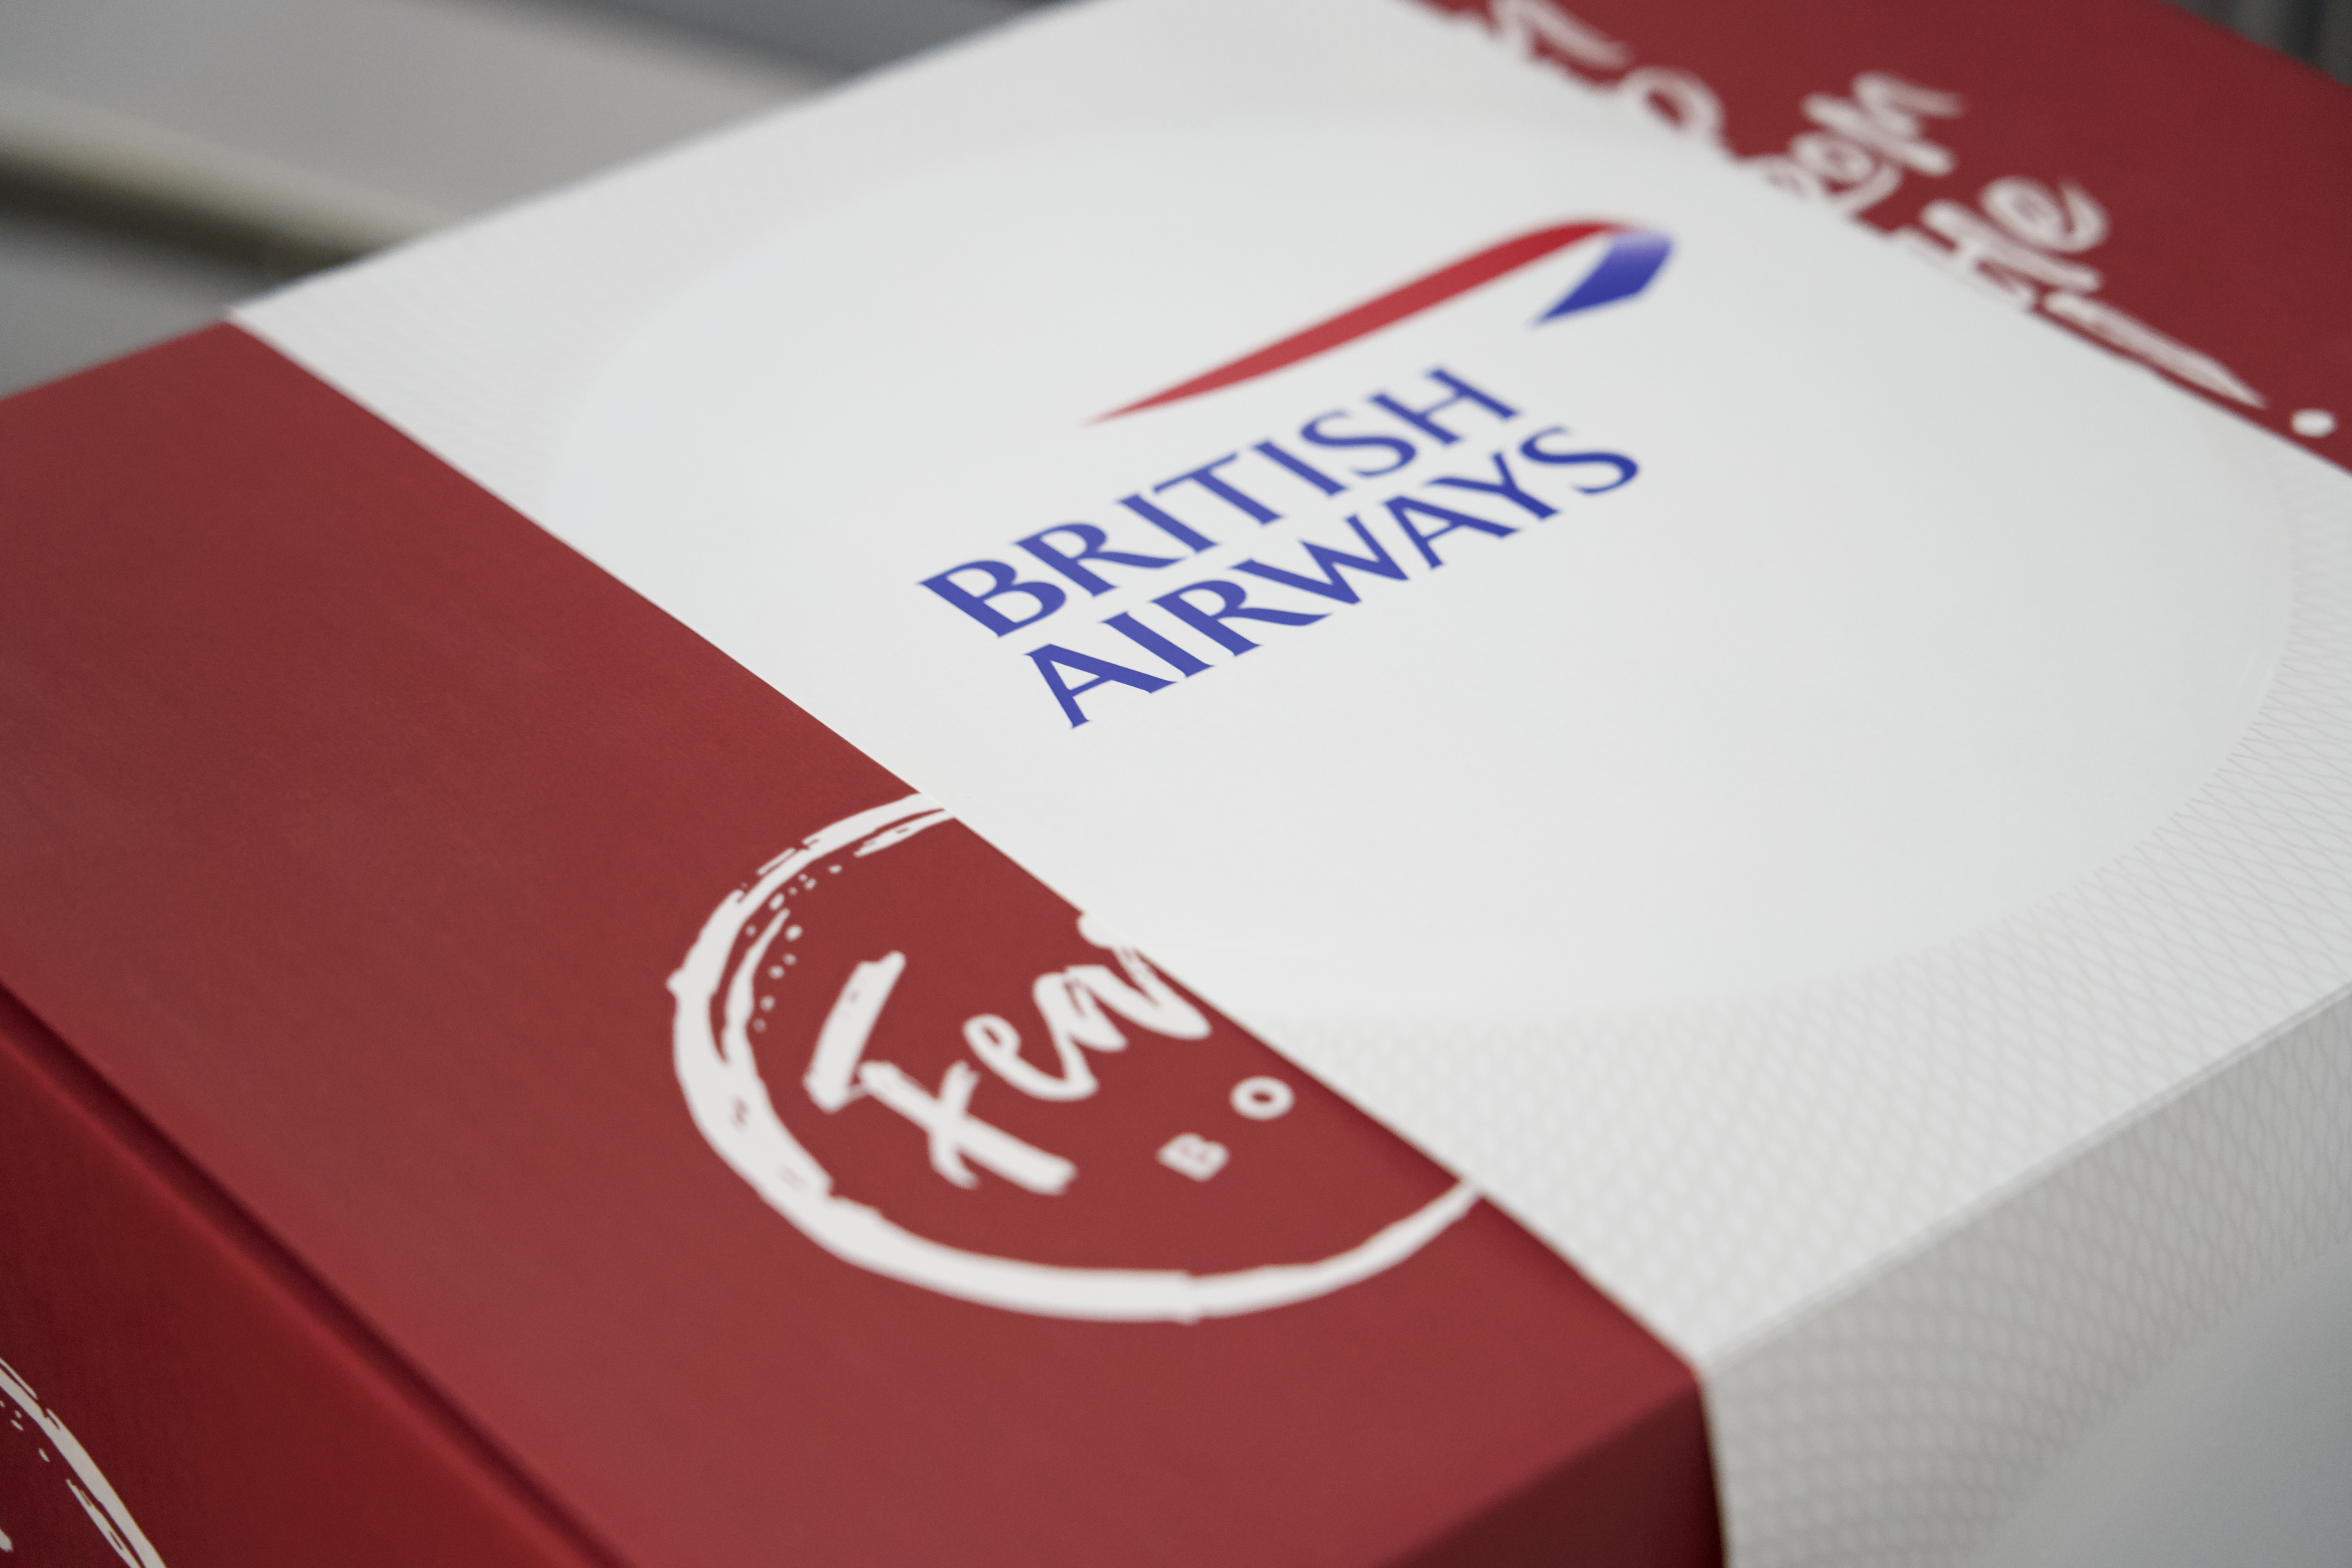 British Airways first class meal kits